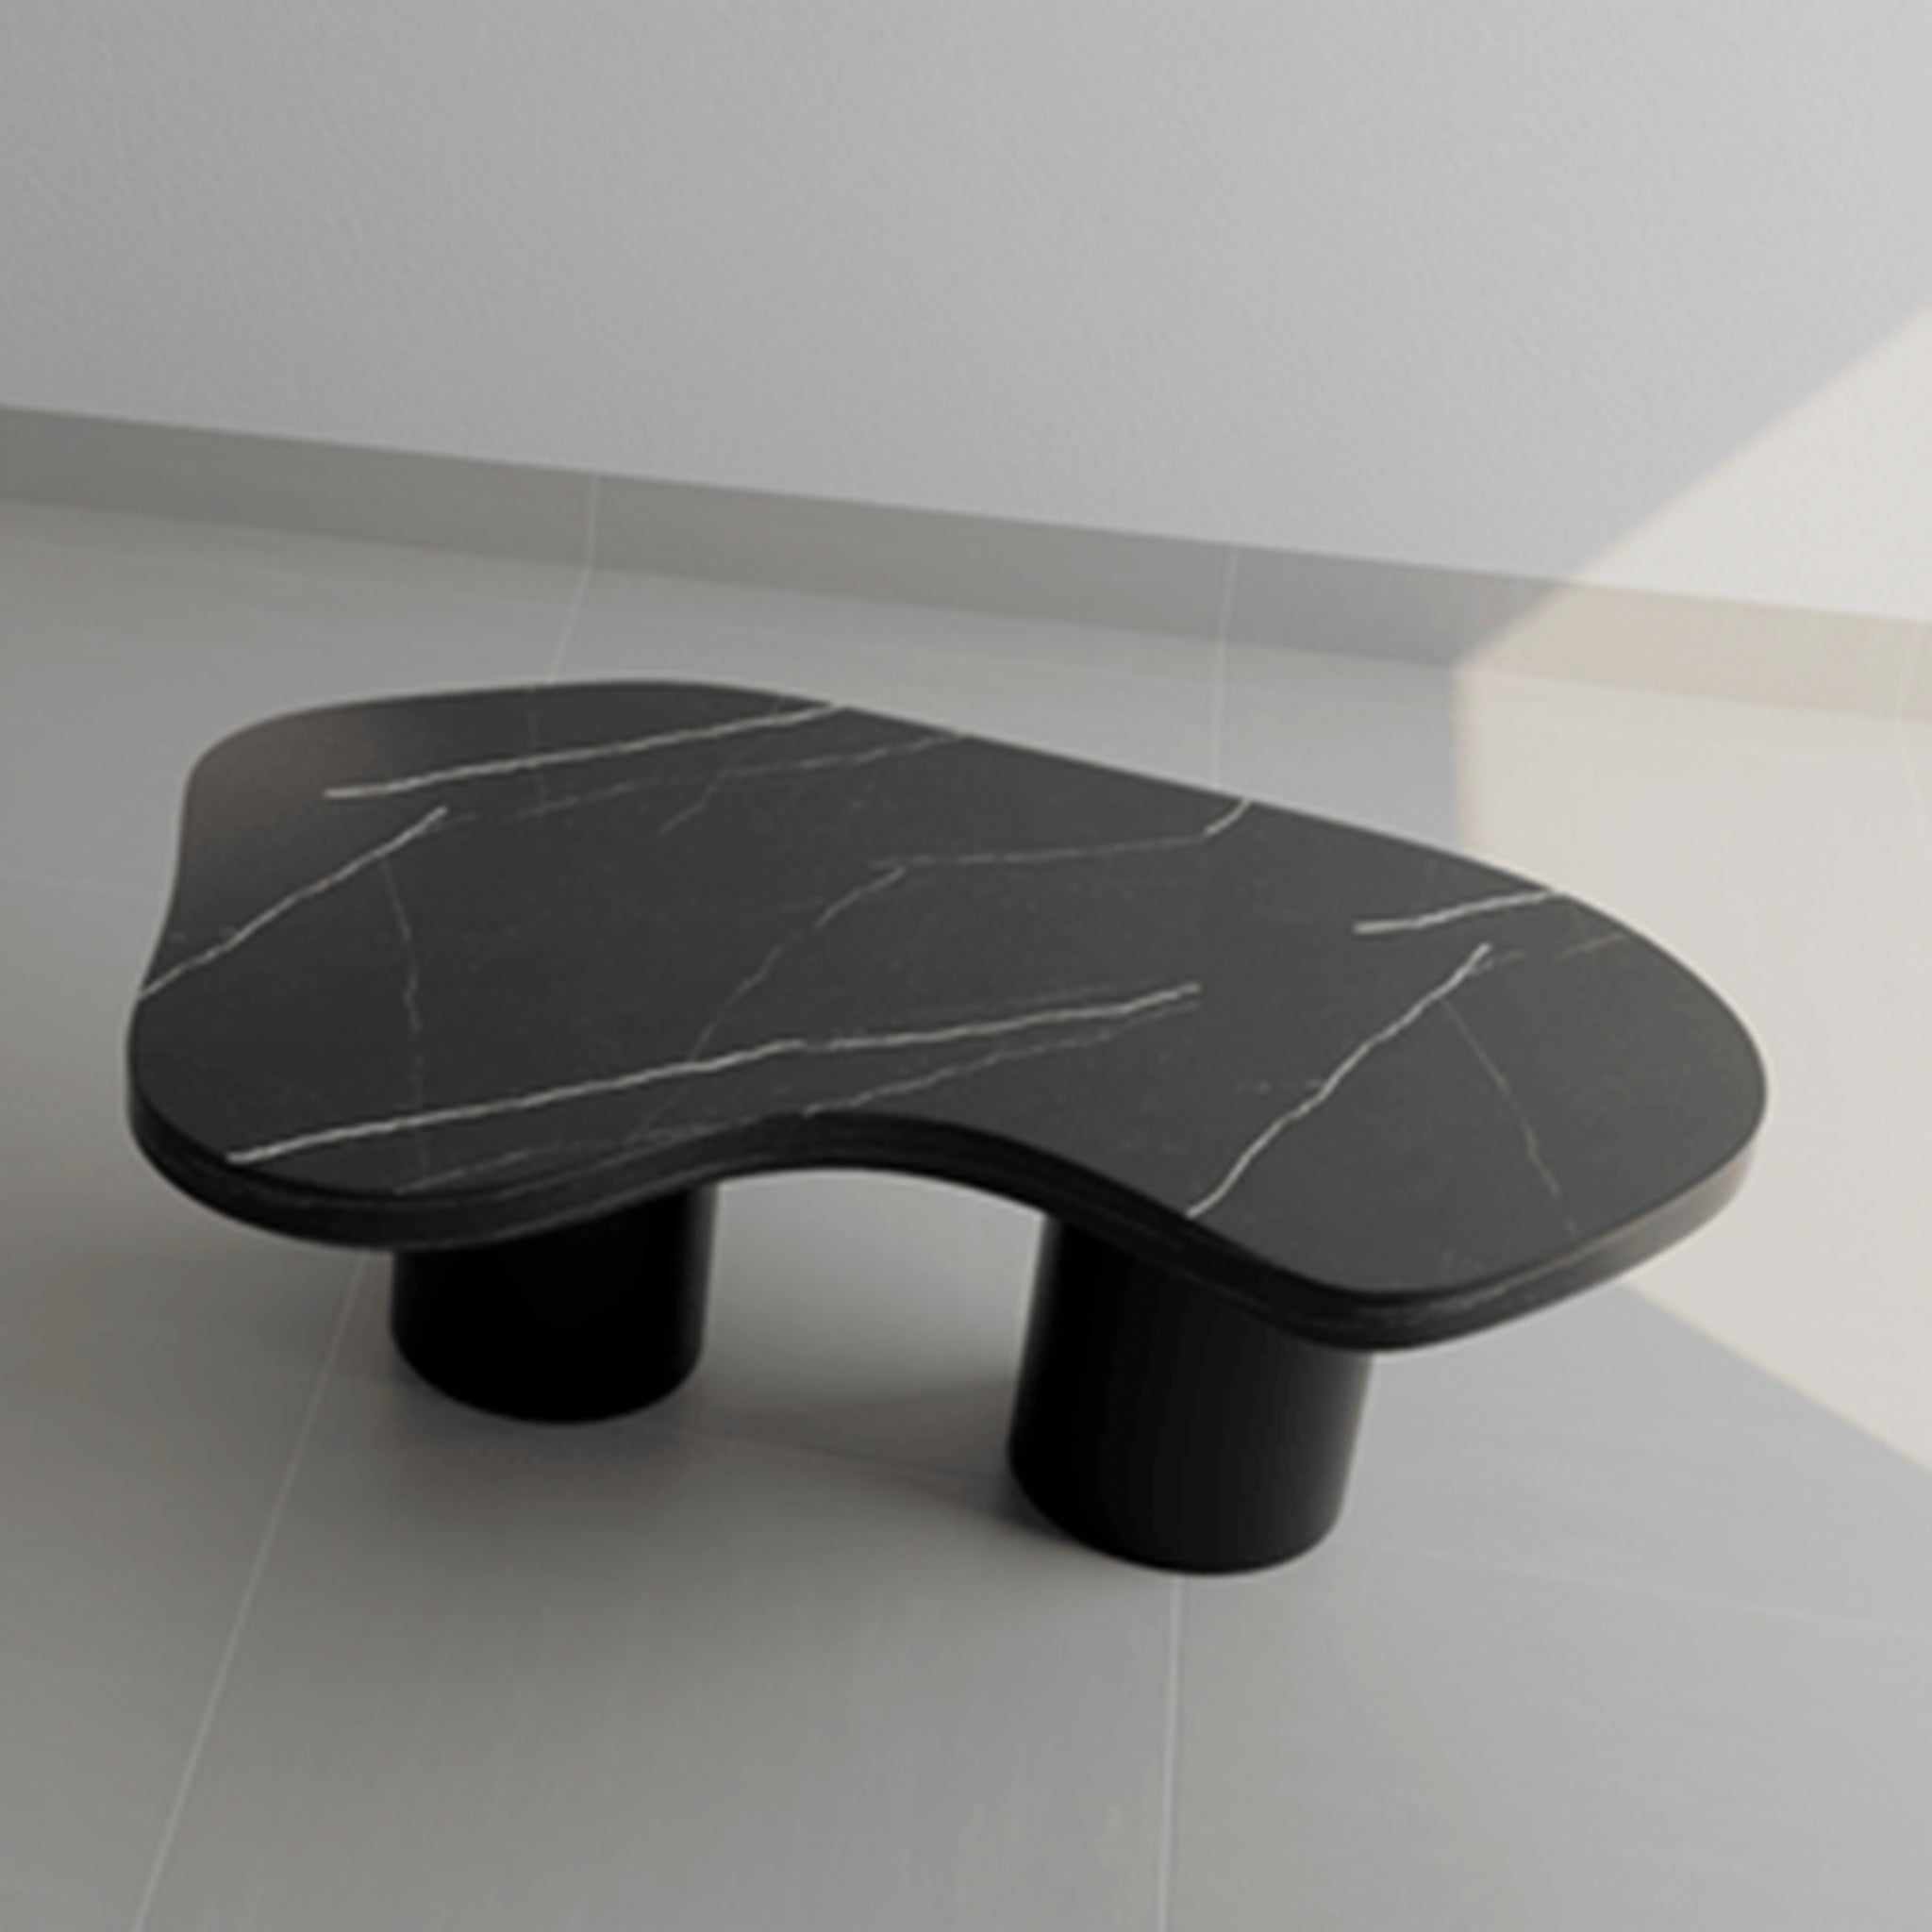 Eliza Coffee Table: Functional living room furniture with a minimalist design.